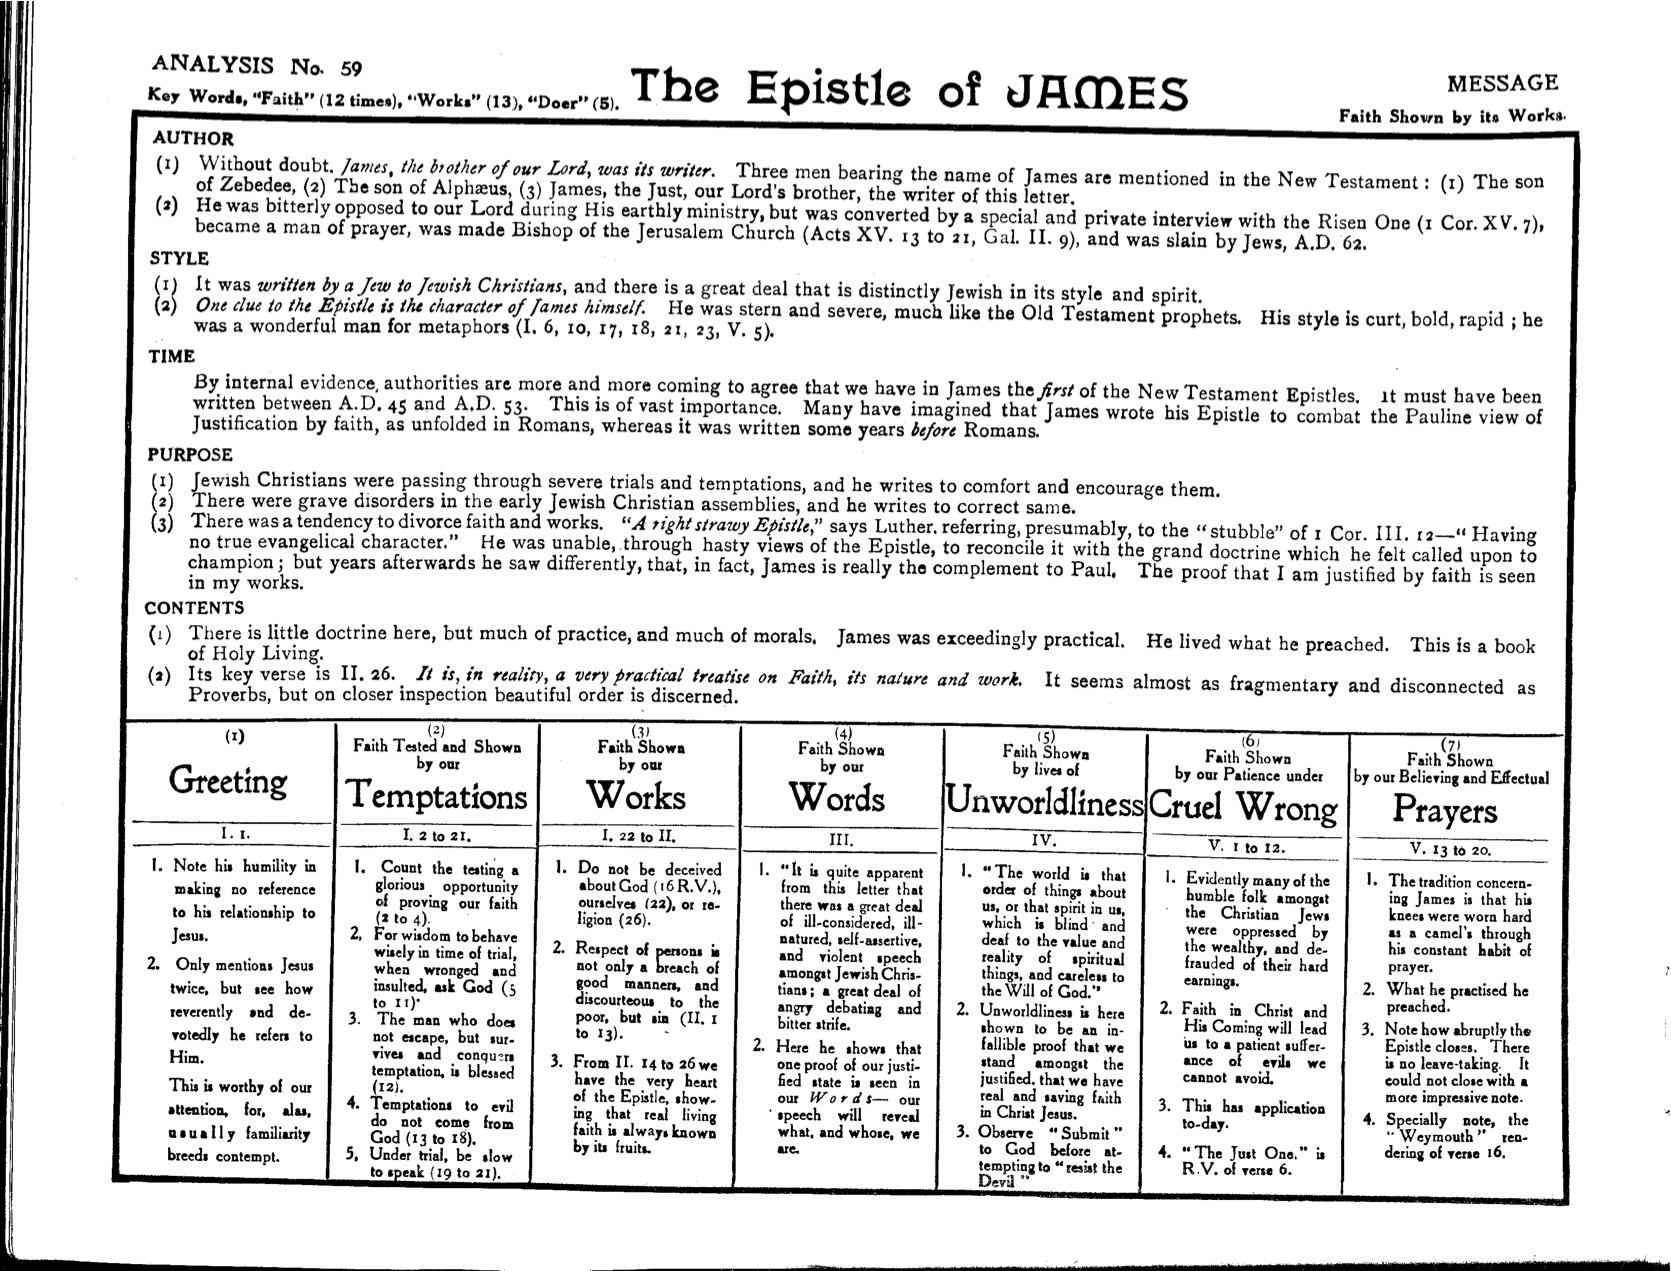 The Epistle of James as it appears in The Outlined Bible